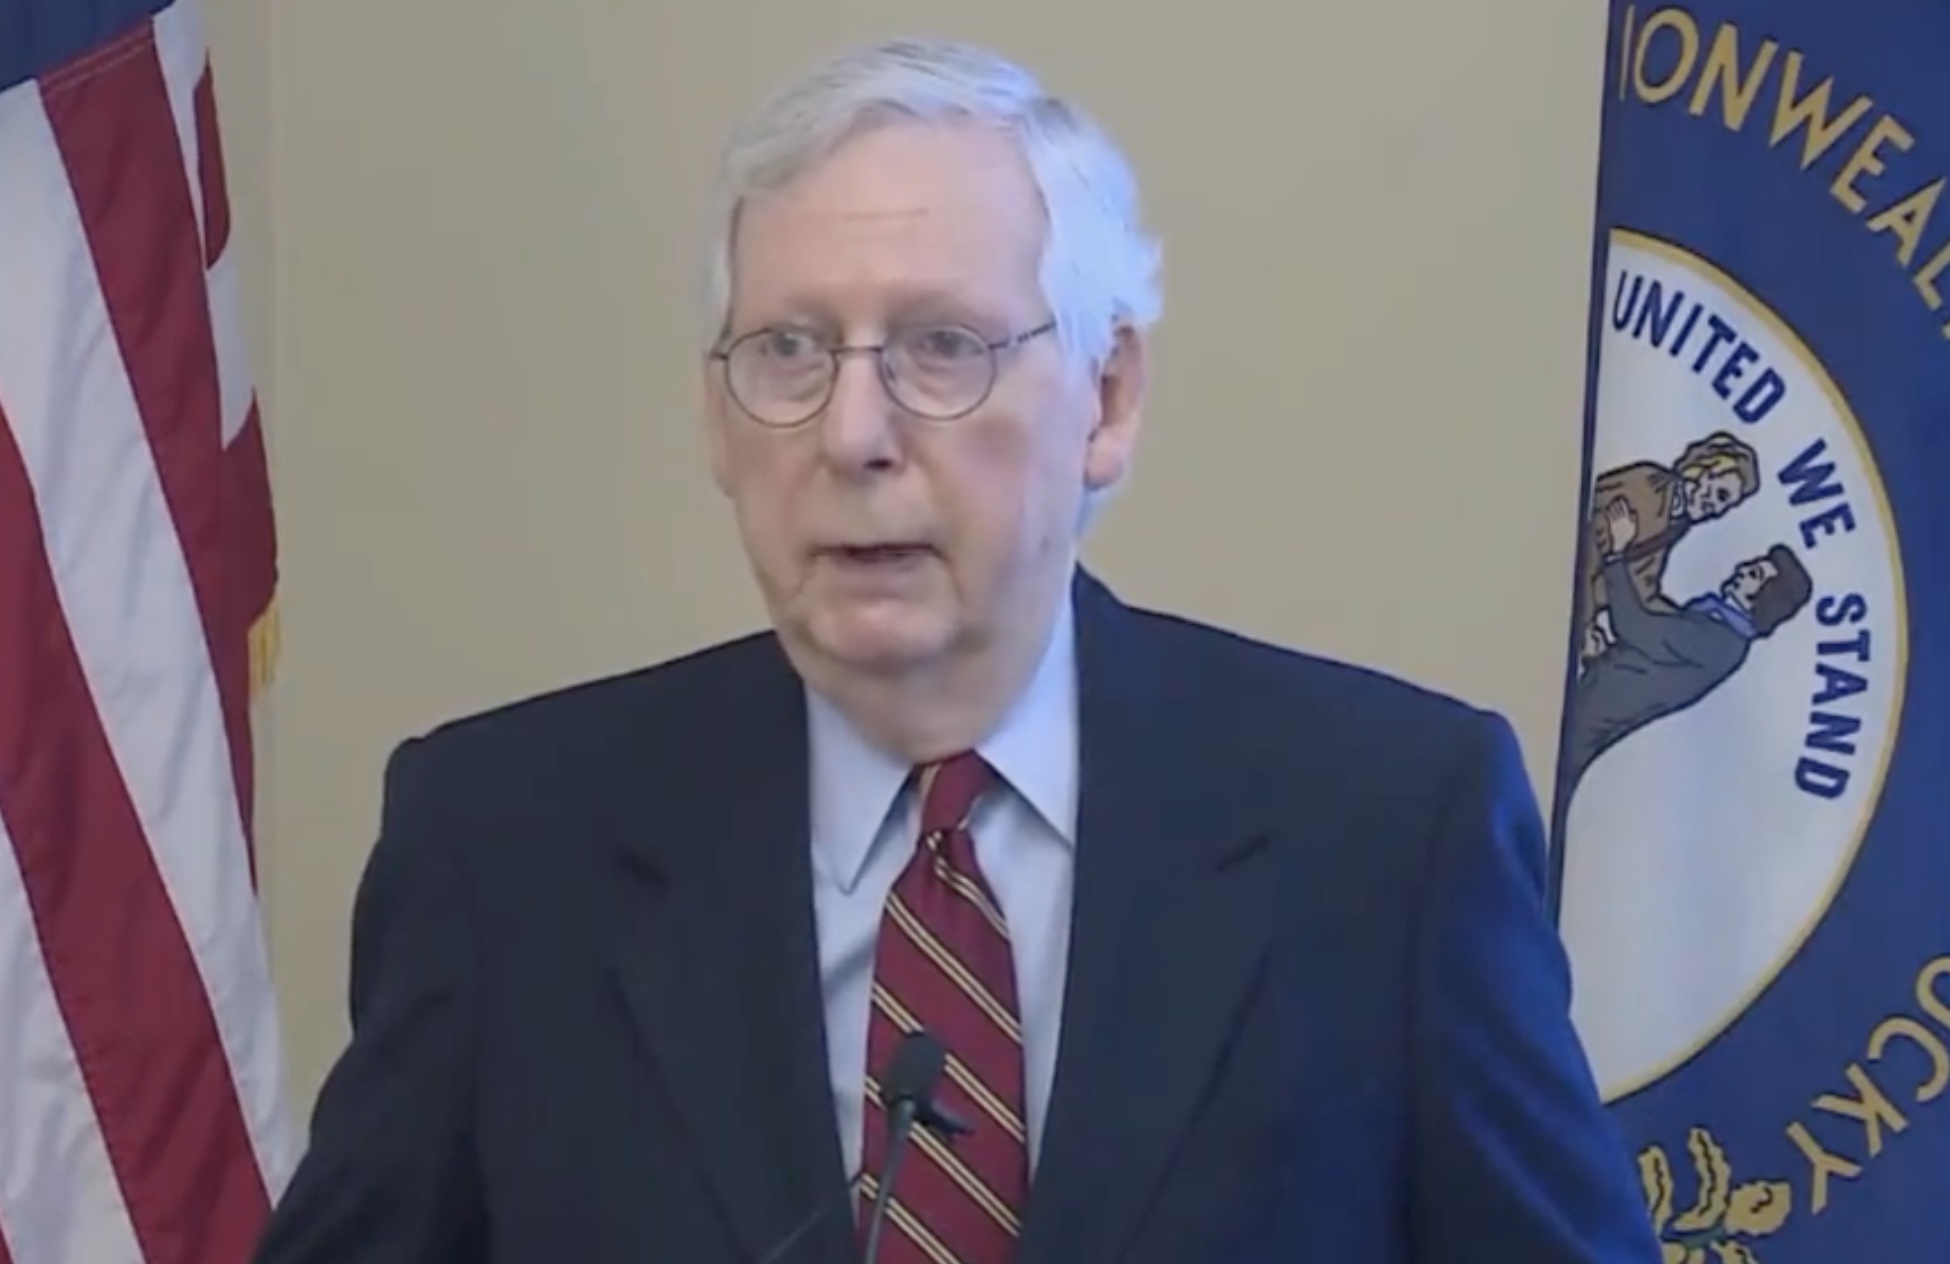 McConnell Said He Was ‘Exhilarated’ After Jan. 6 ‘Totally Discredited’ Trump: ‘He Put a Gun to His Head and Pulled the Trigger’